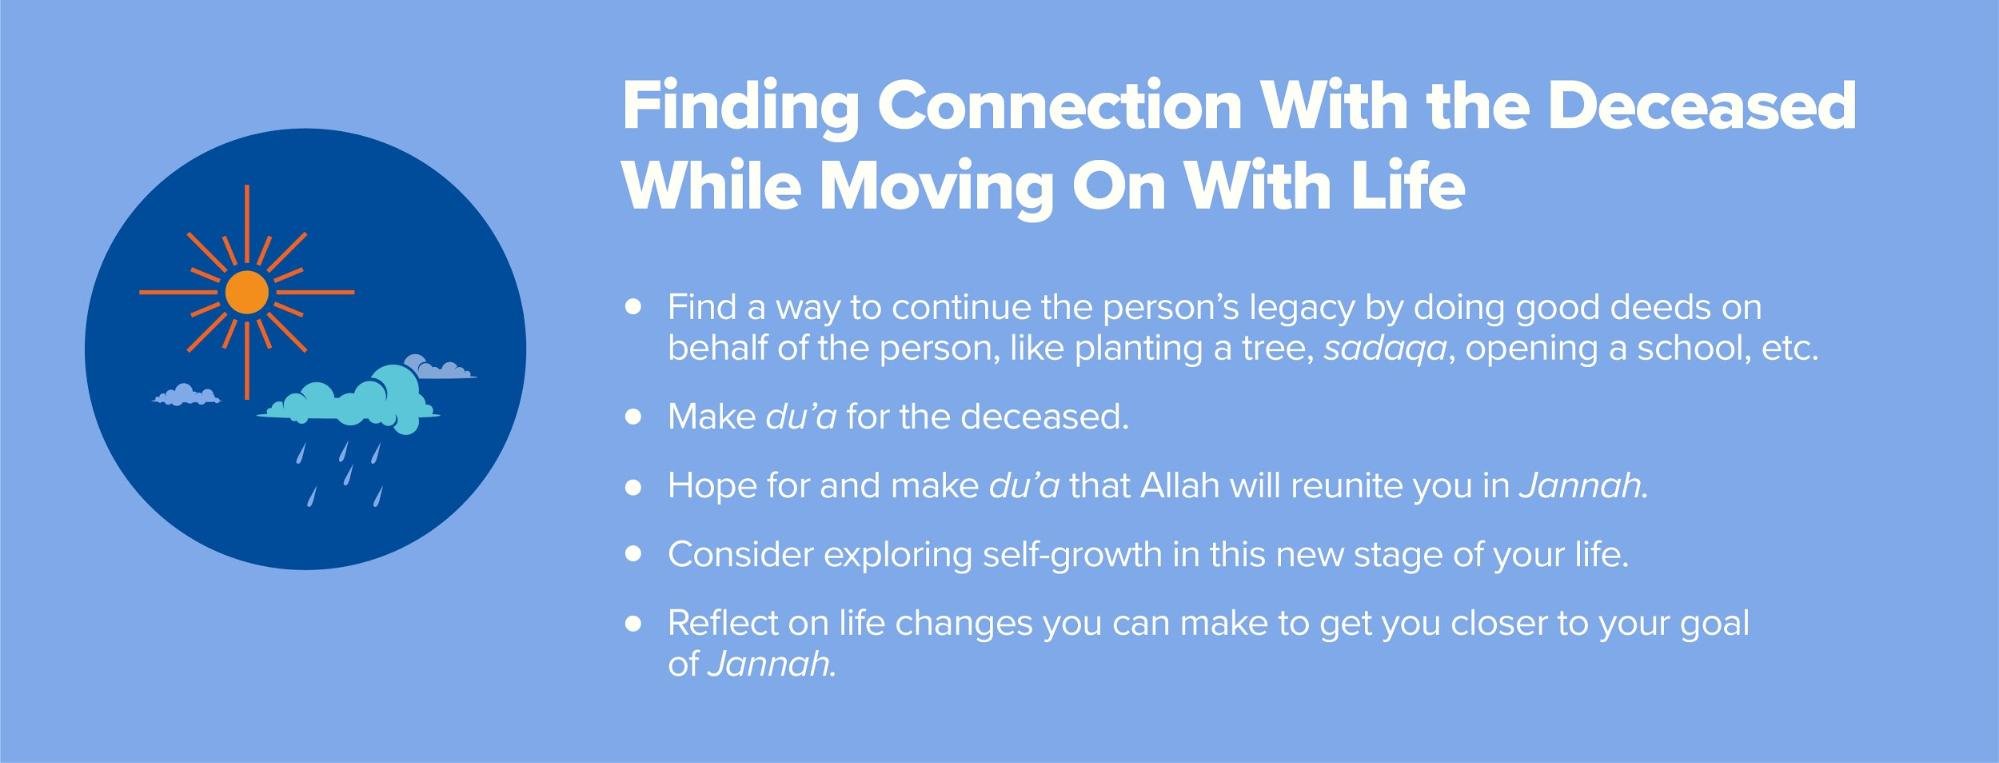 Steps on how to find connection with the deceased while moving on with life